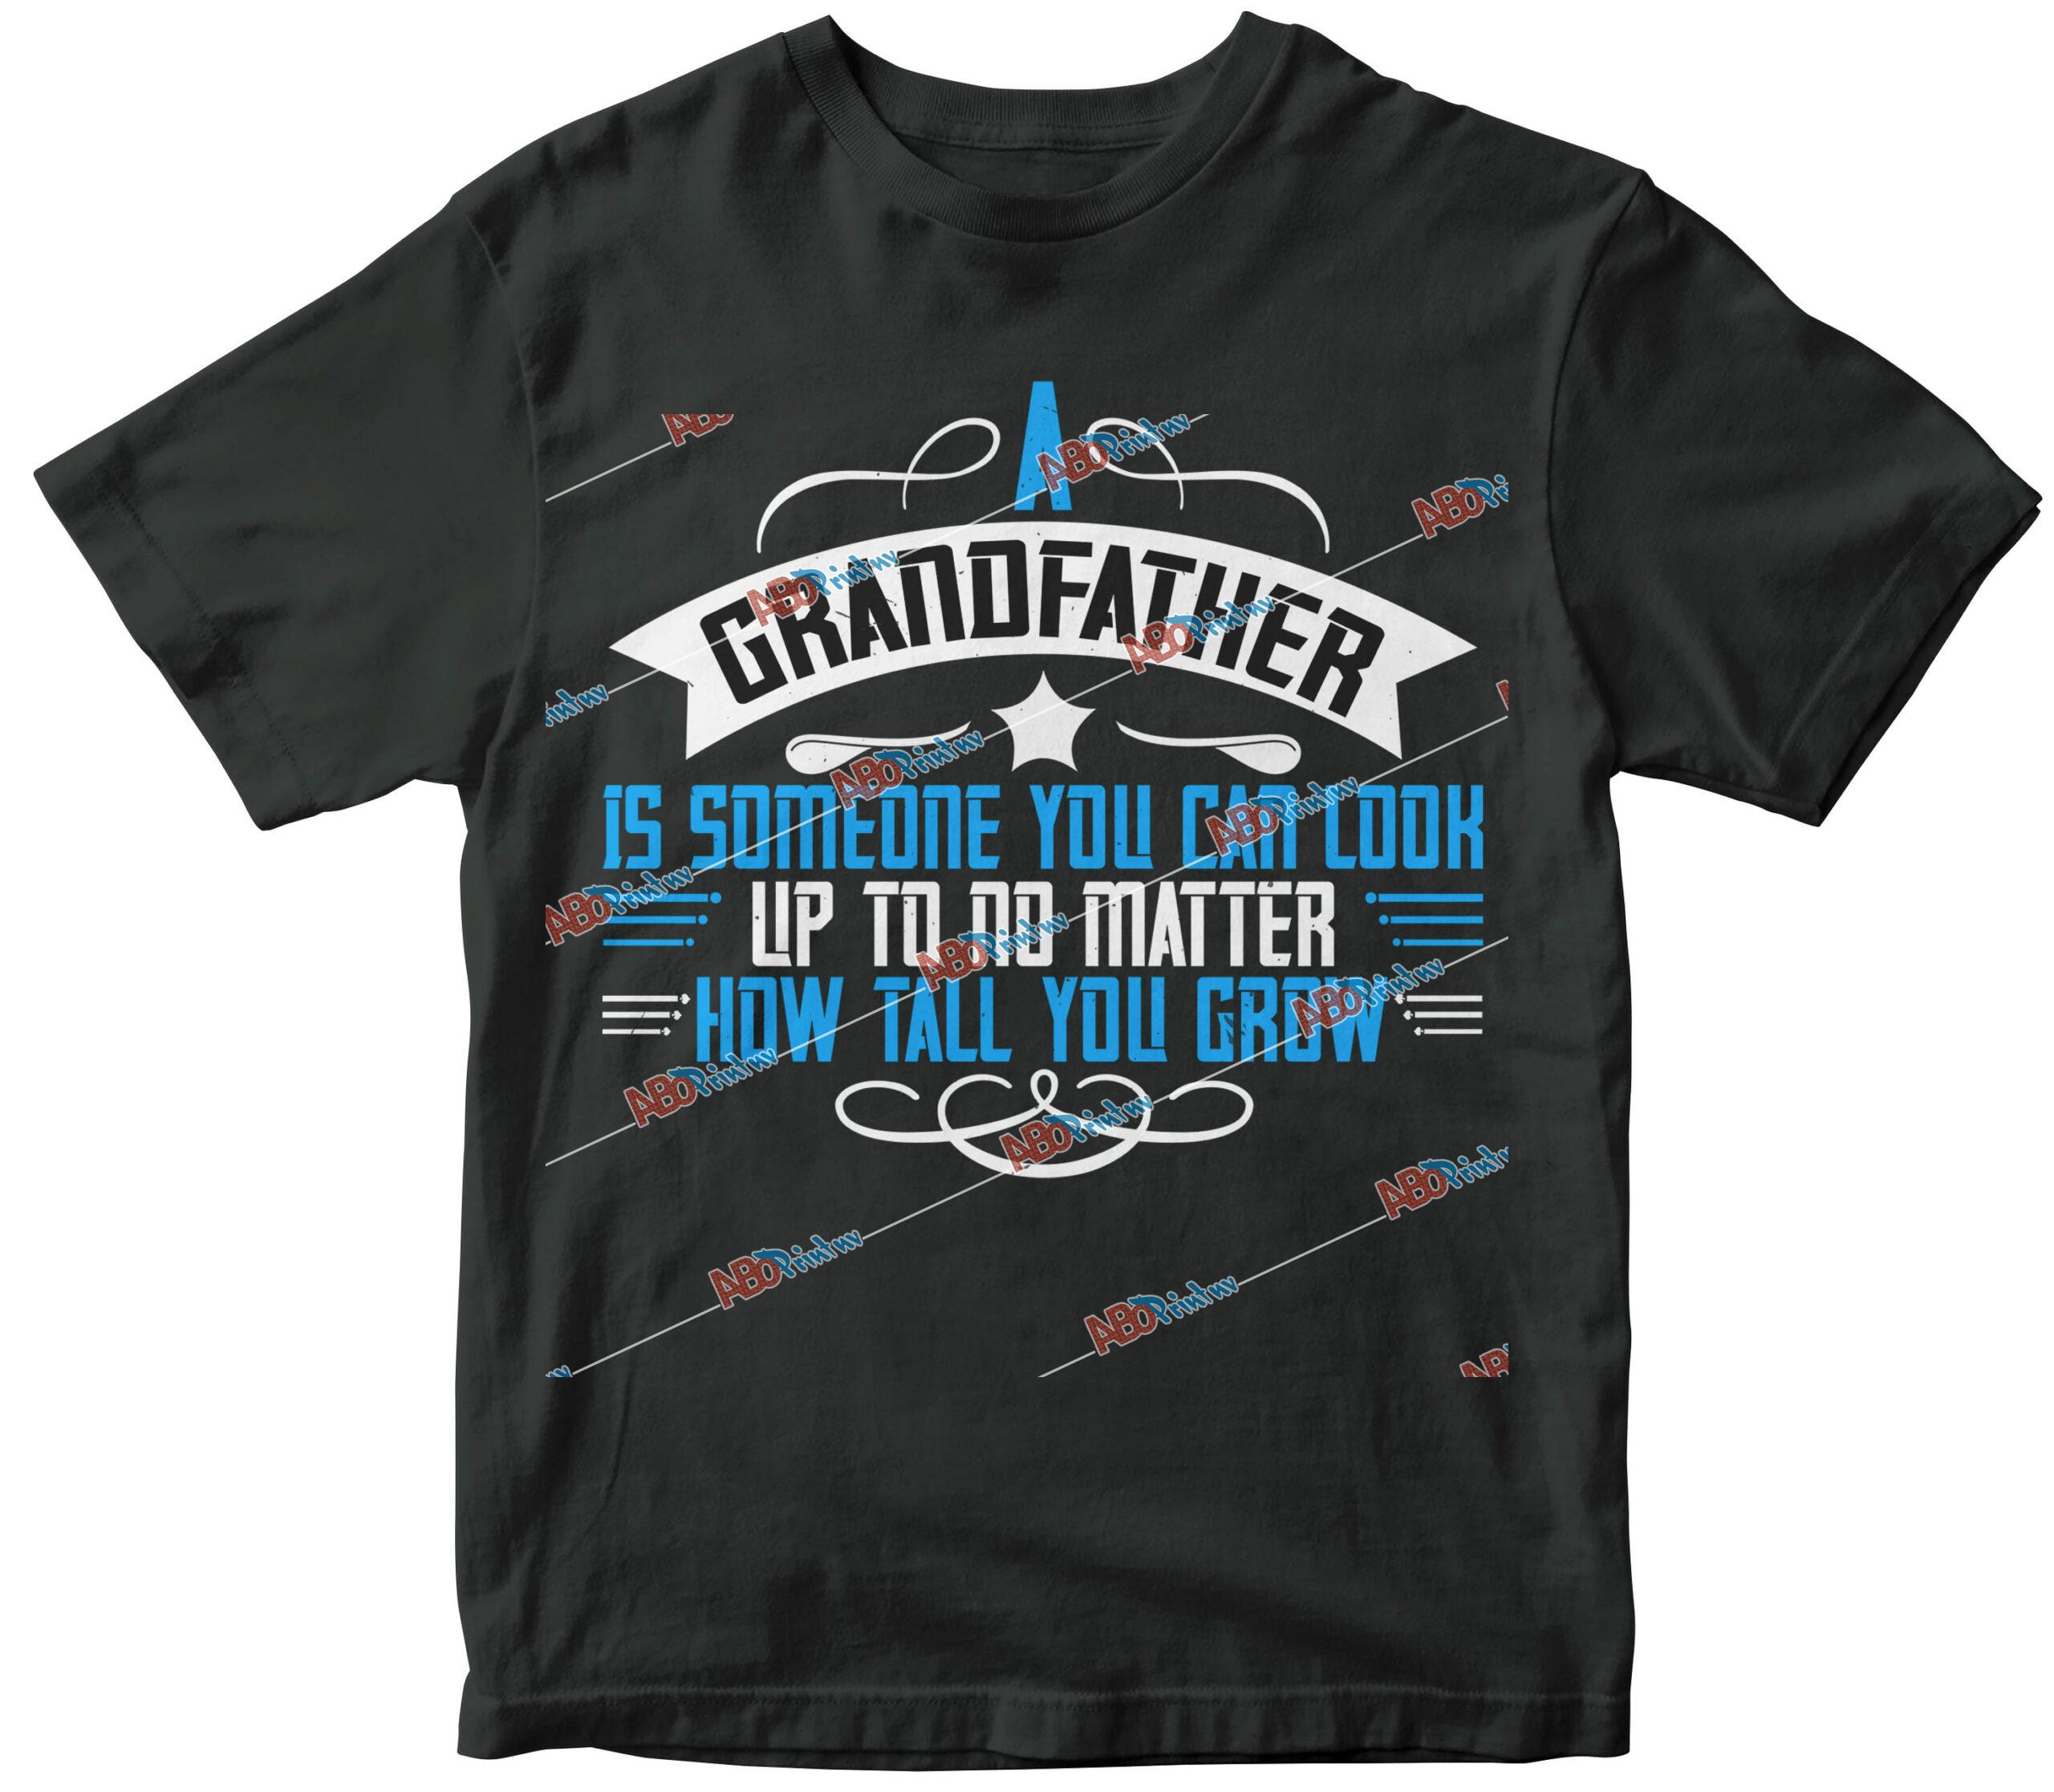 A grandfather is someone you can look up to no matter how tall you gro-03.jpg